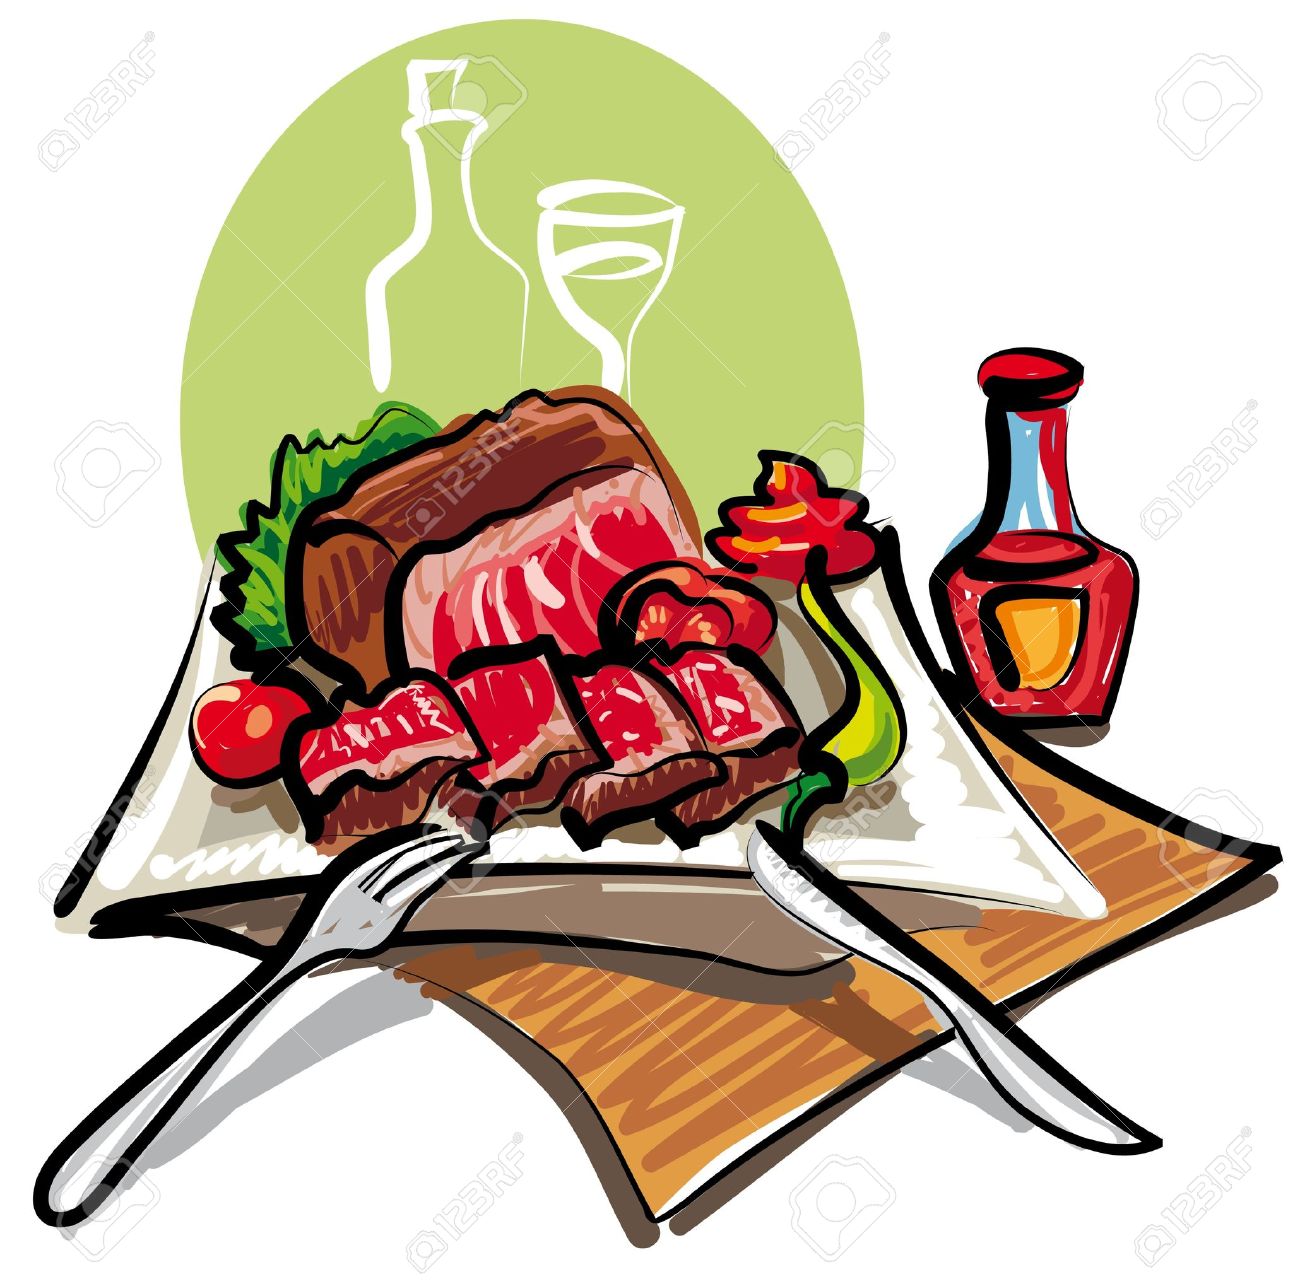 Roast beef clipart - Clipground